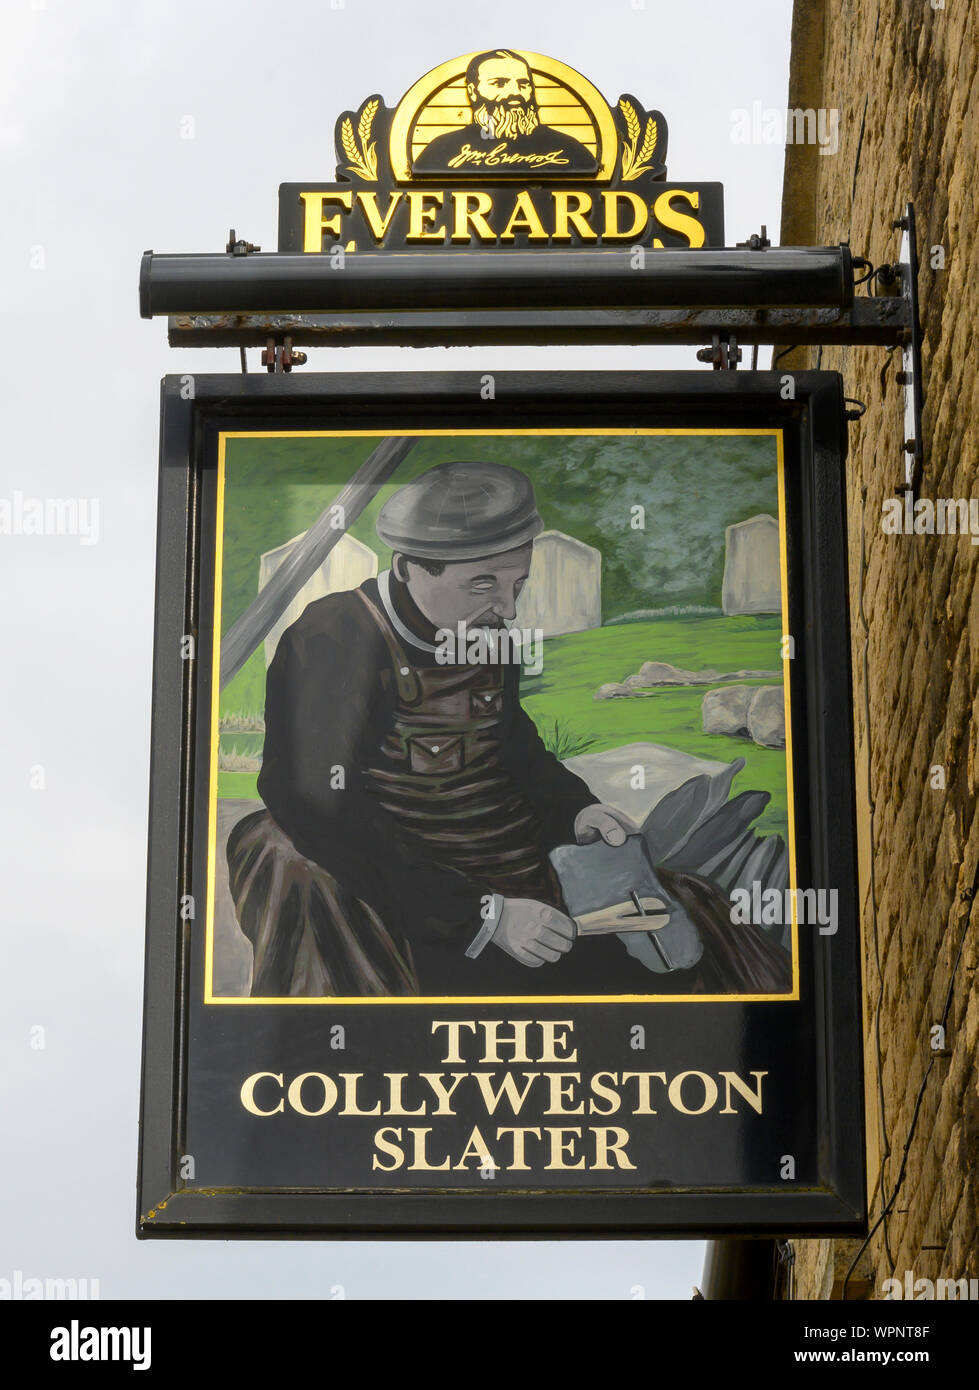 Hanging pub sign at The Collyweston Slater public house, Main Road, Collyweston, Northamptonshire, England, UK Stock Photo